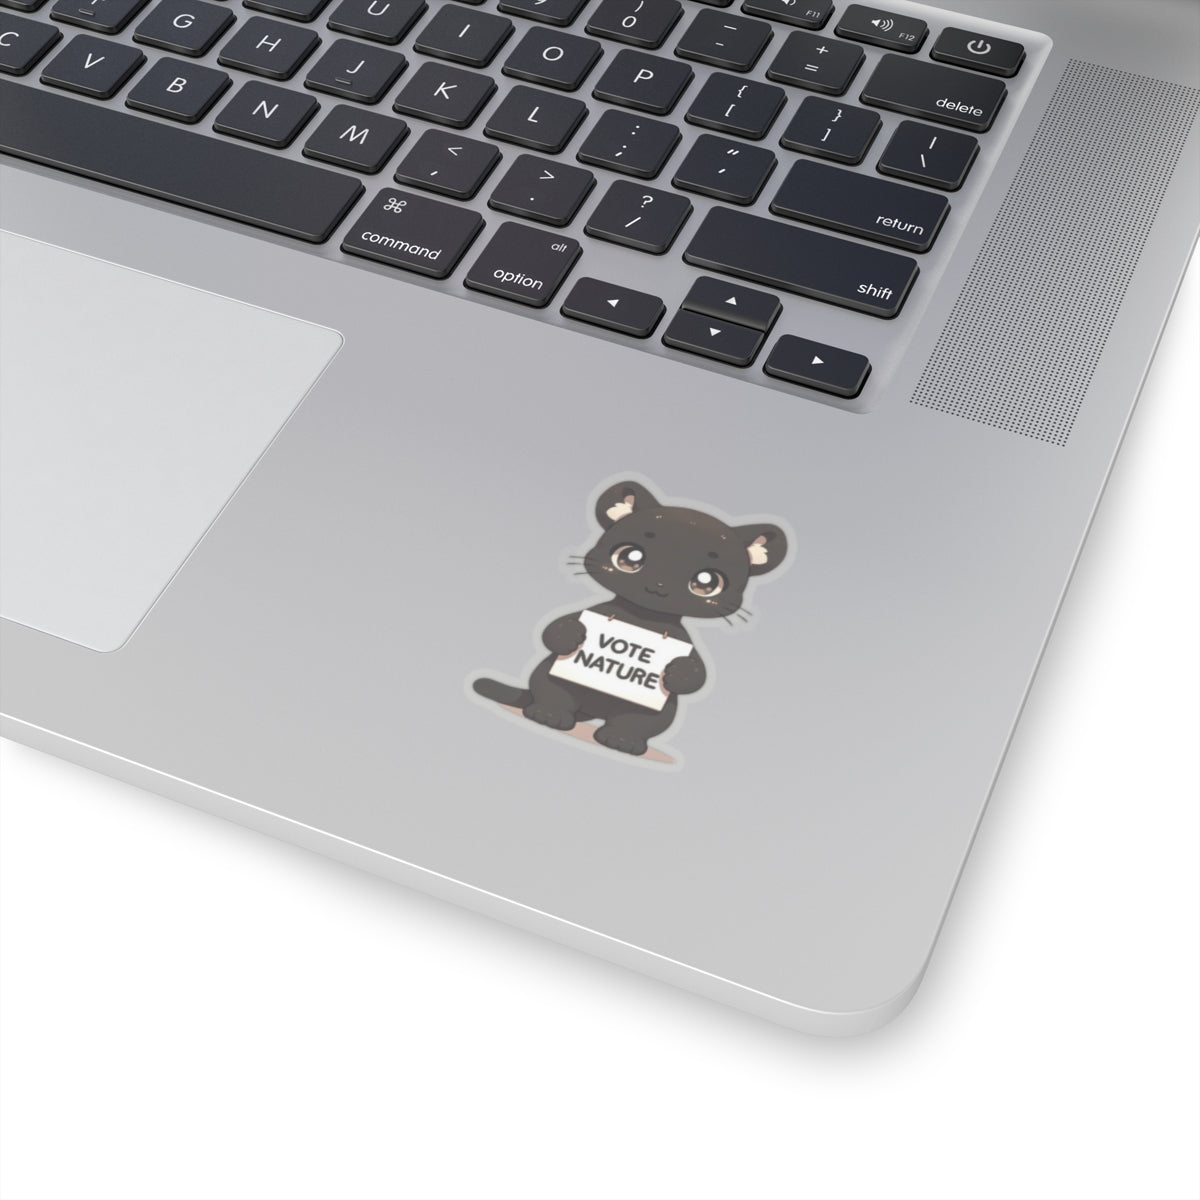 Inspirational Cute Panther Statement vinyl Sticker: Vote Nature! for laptop, kindle, phone, ipad, instrument case, notebook, mood board